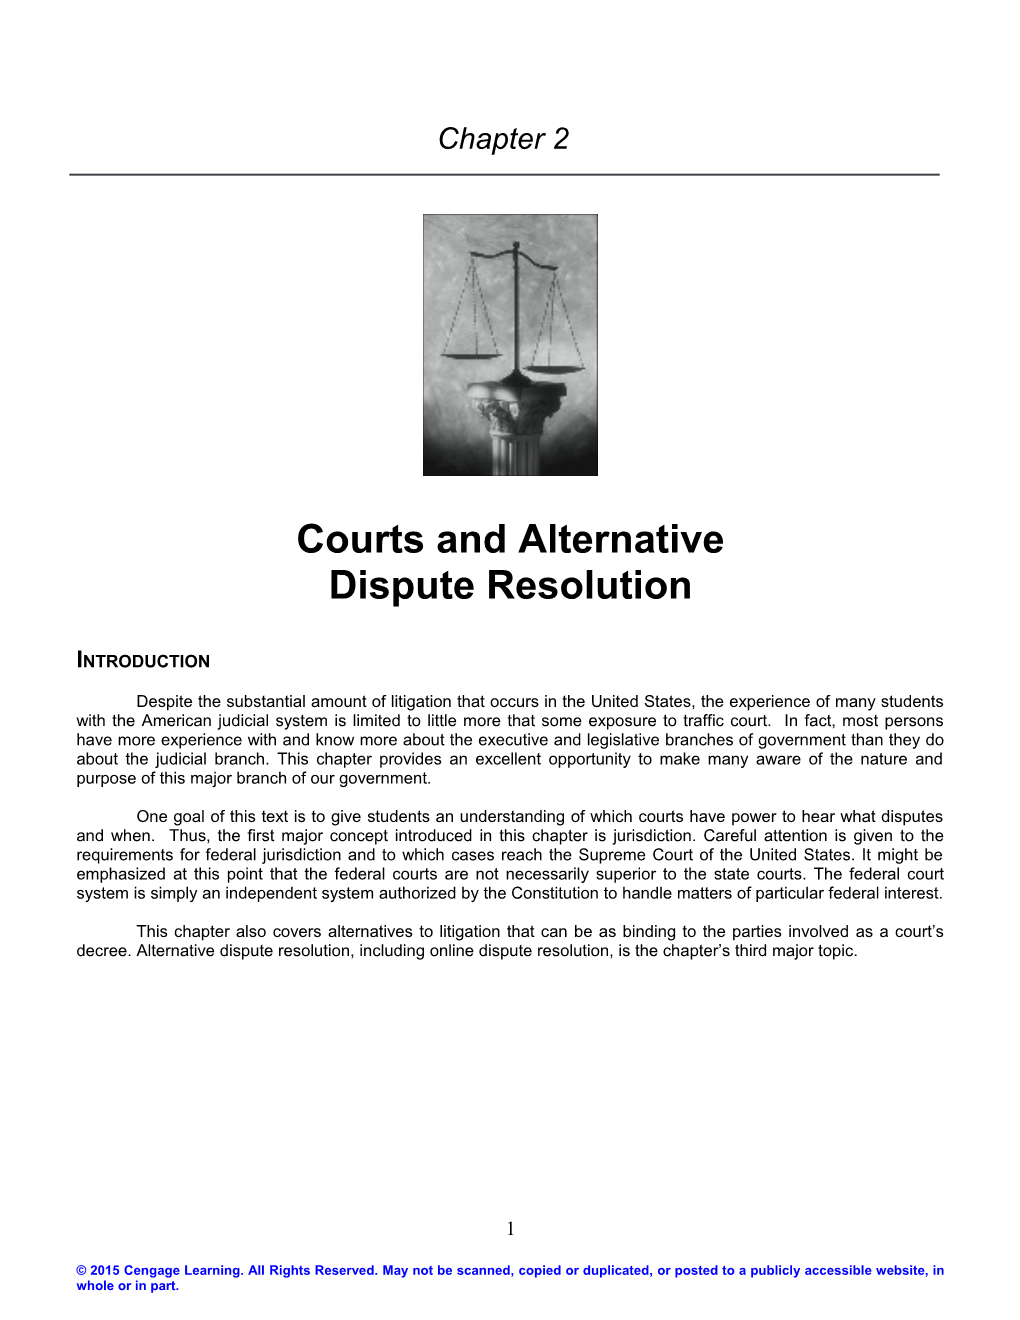 Courts and Alternative